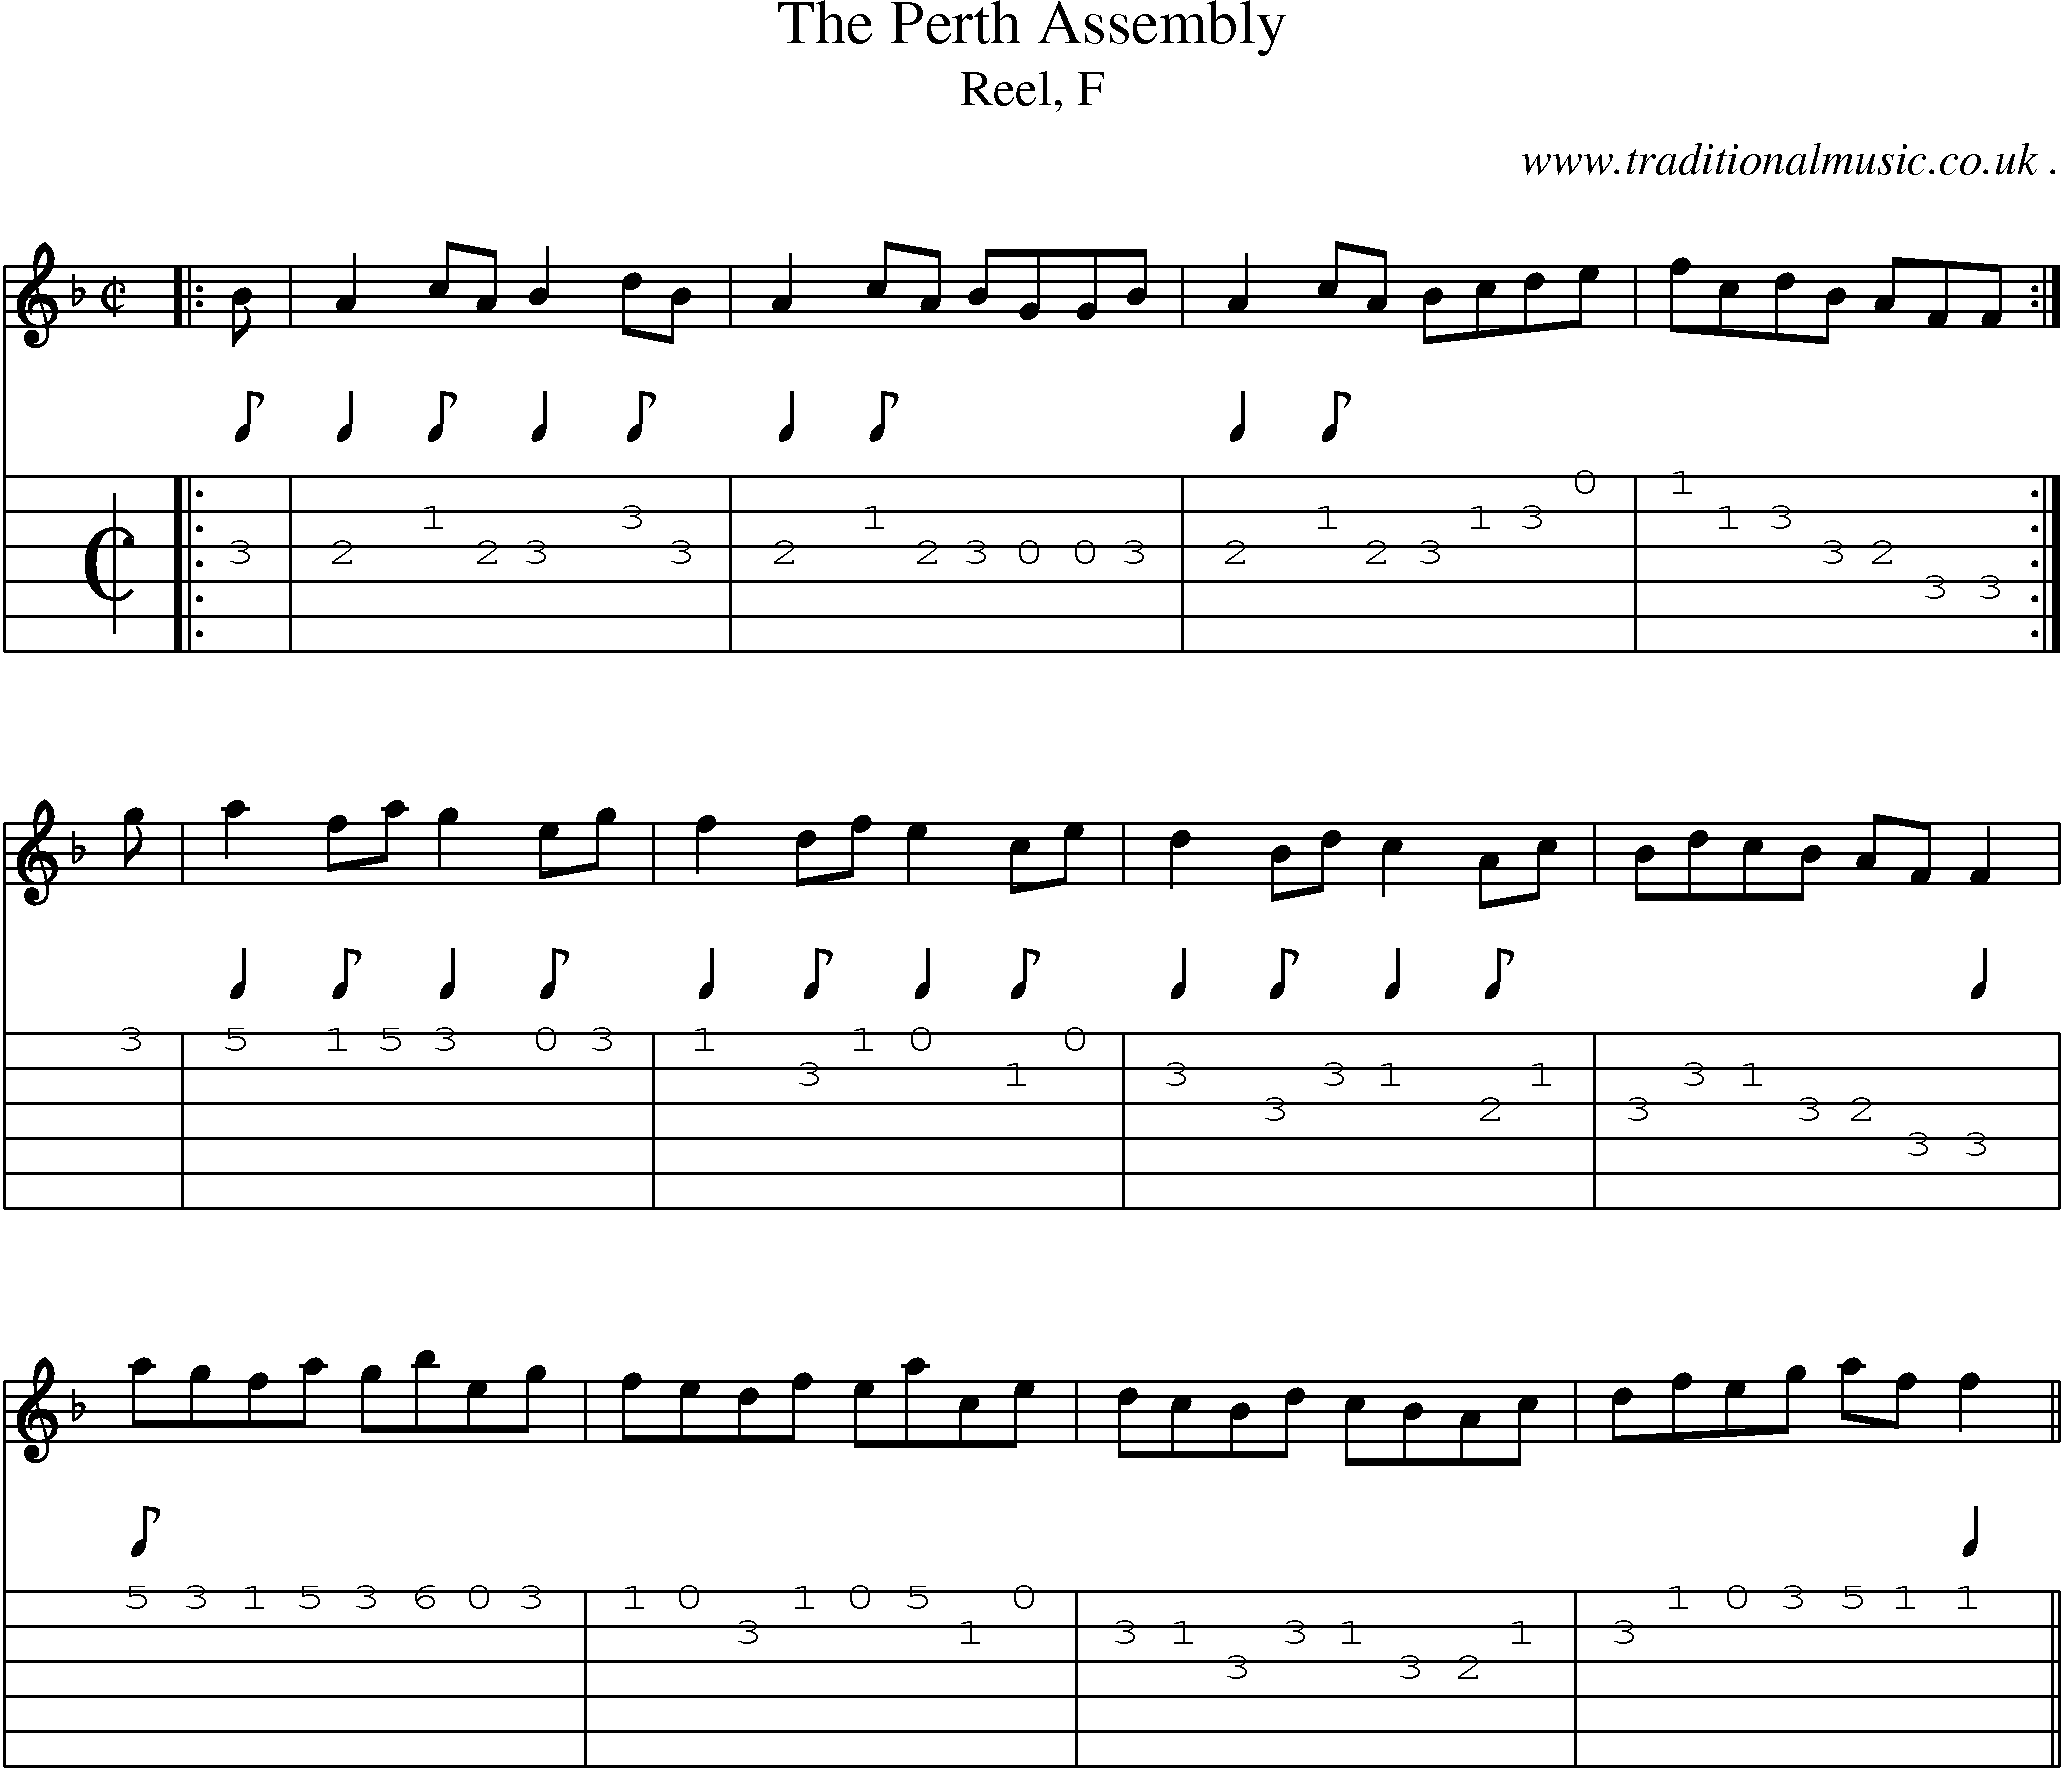 Sheet-music  score, Chords and Guitar Tabs for The Perth Assembly